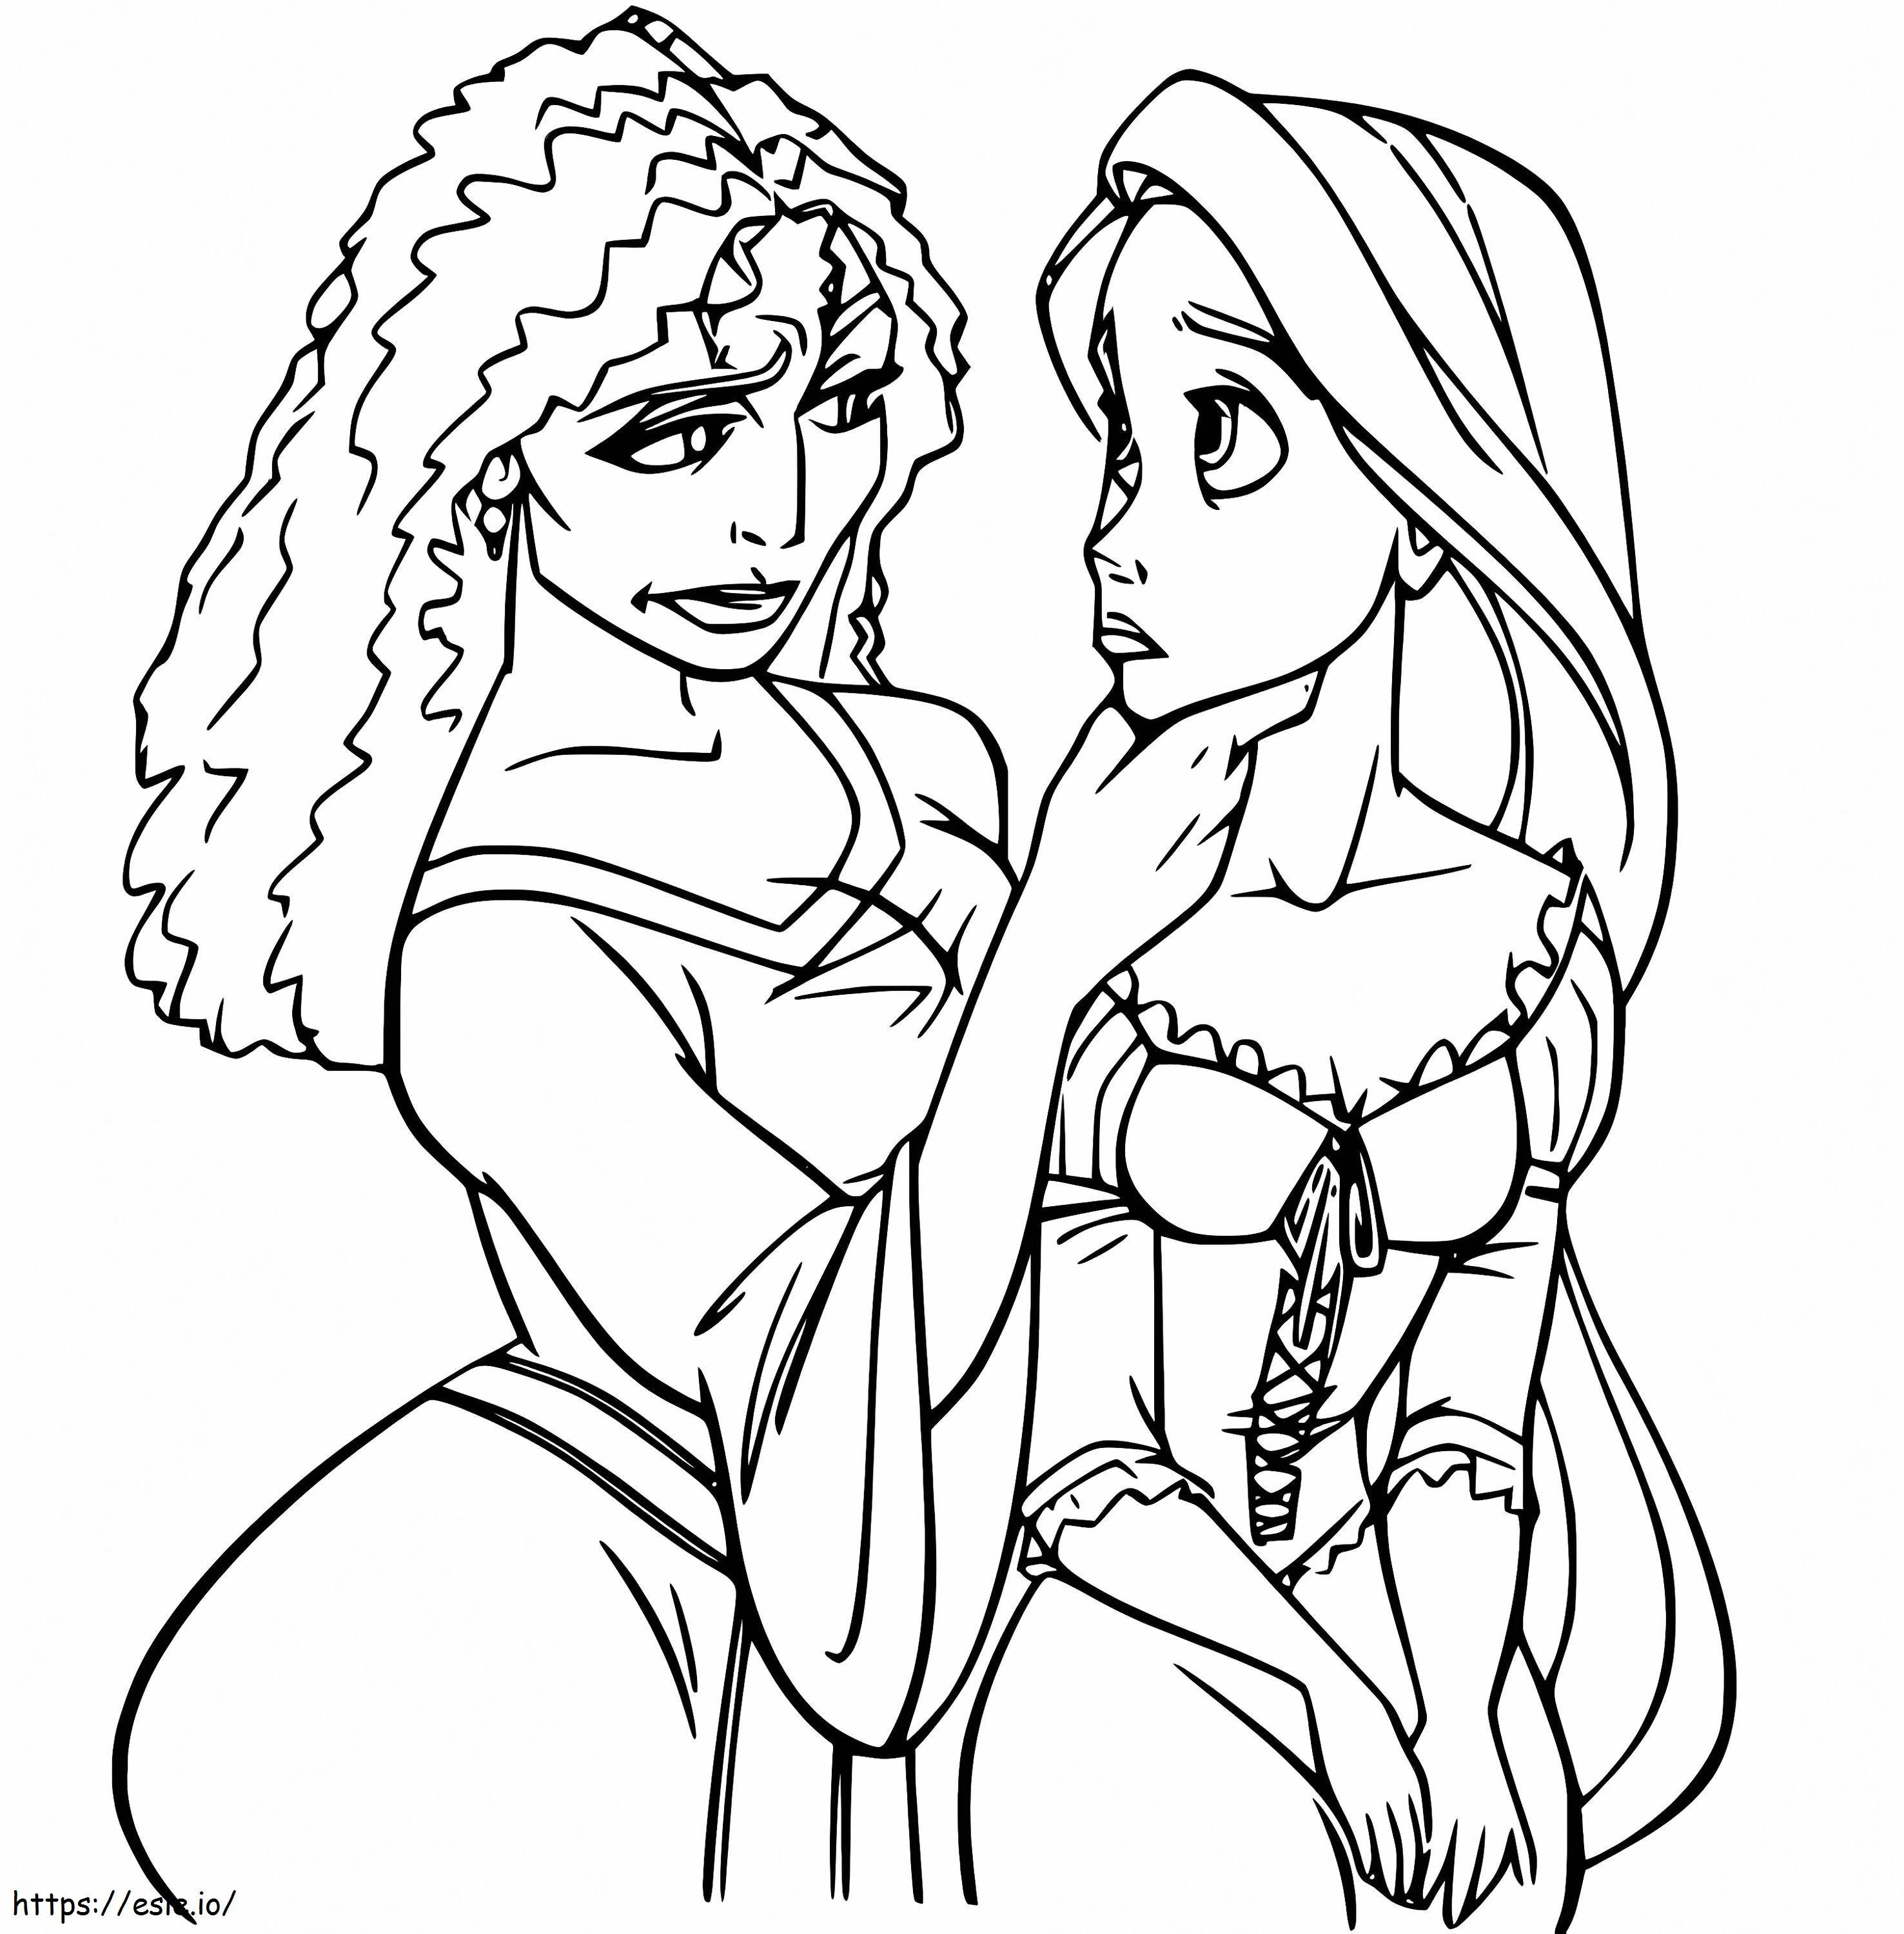 Mother Gothel With Rapunzel coloring page